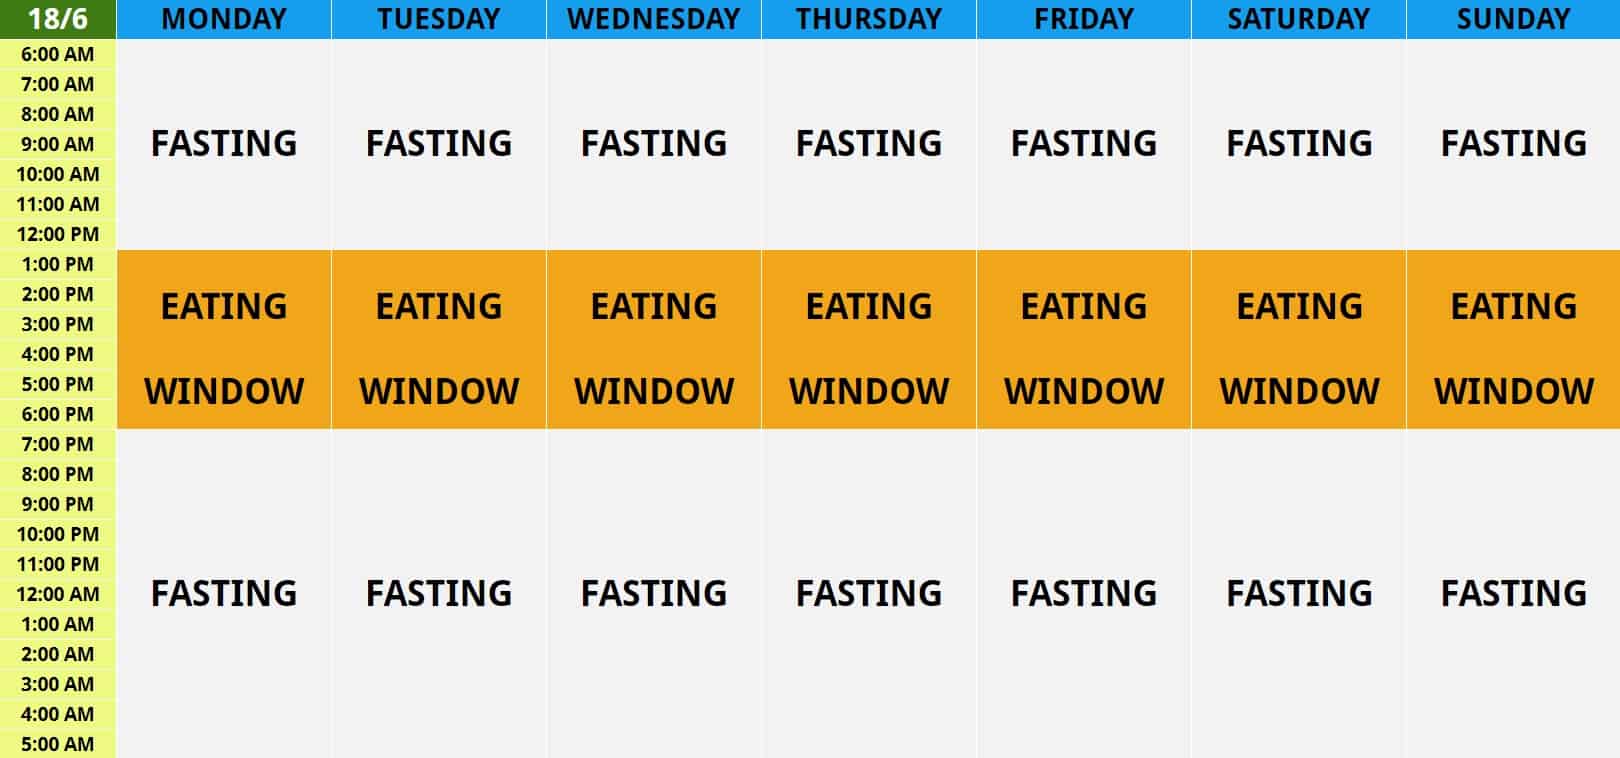 intermittent fasting protocols, types of intermittent fasting protocols, 18/6 intermittent fasting